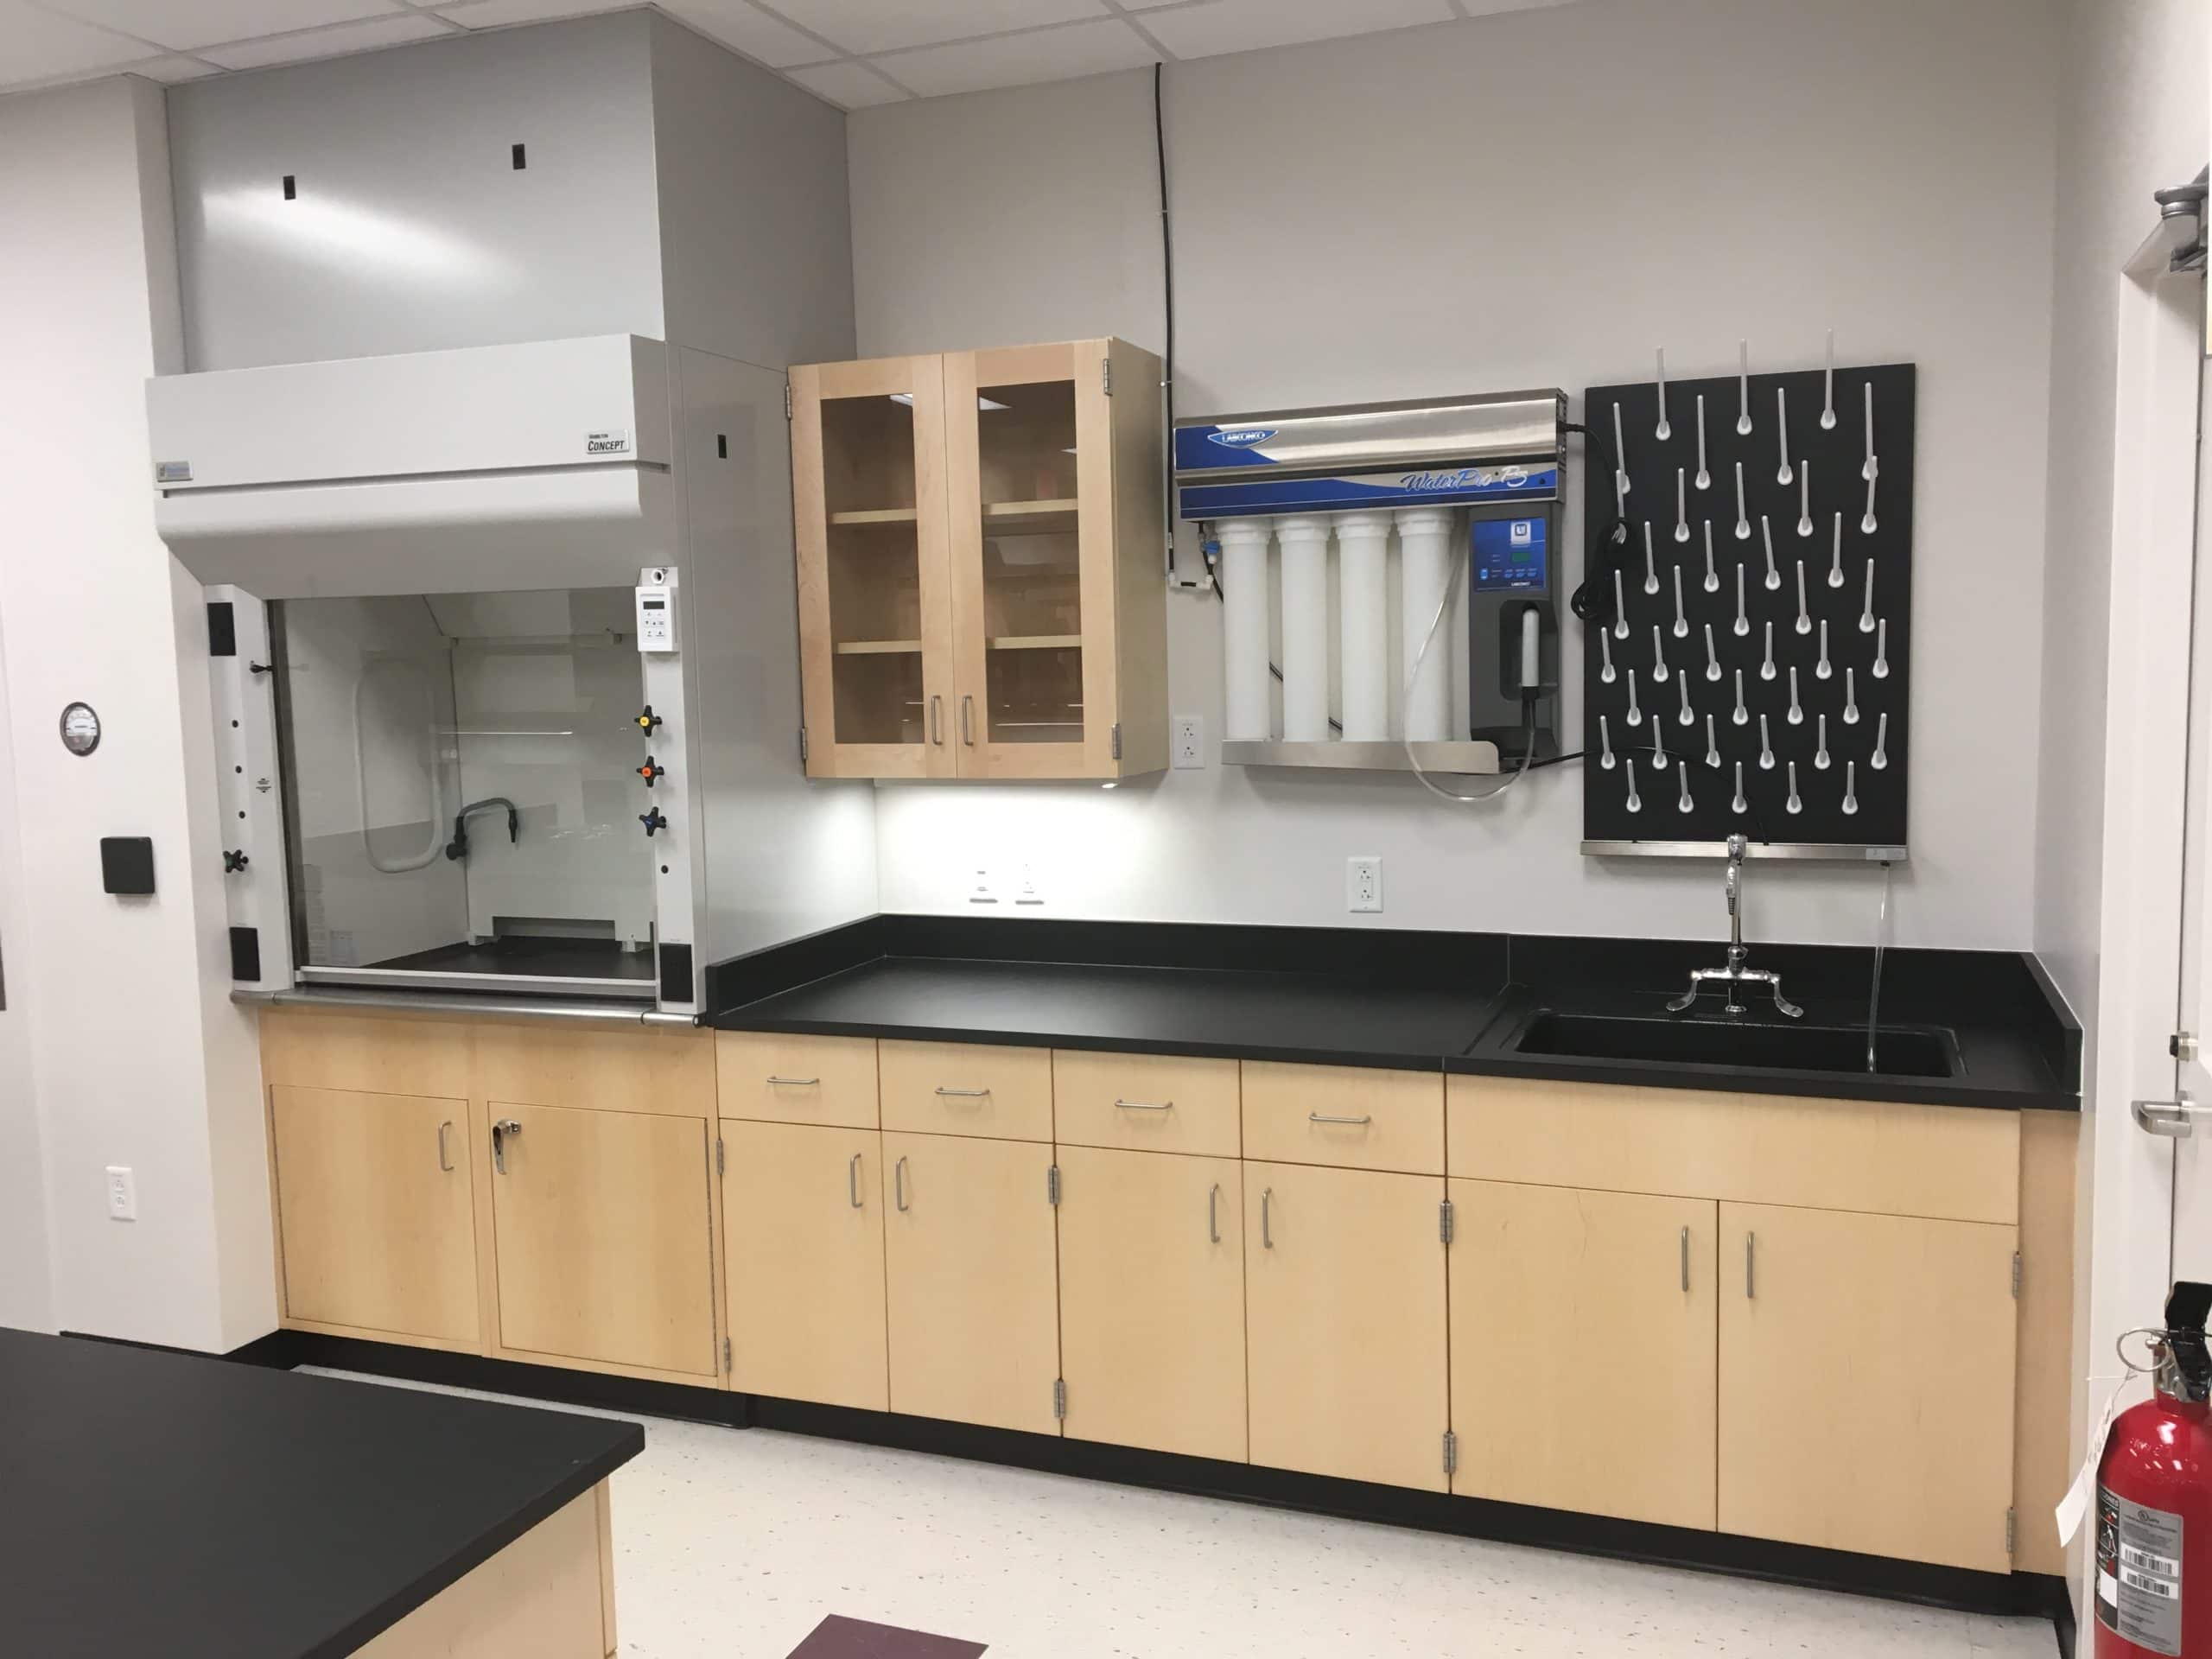 Max Resistance 2 laboratory work surface from Fundermax for the Biochemistry Lab Renovation at Middletown University